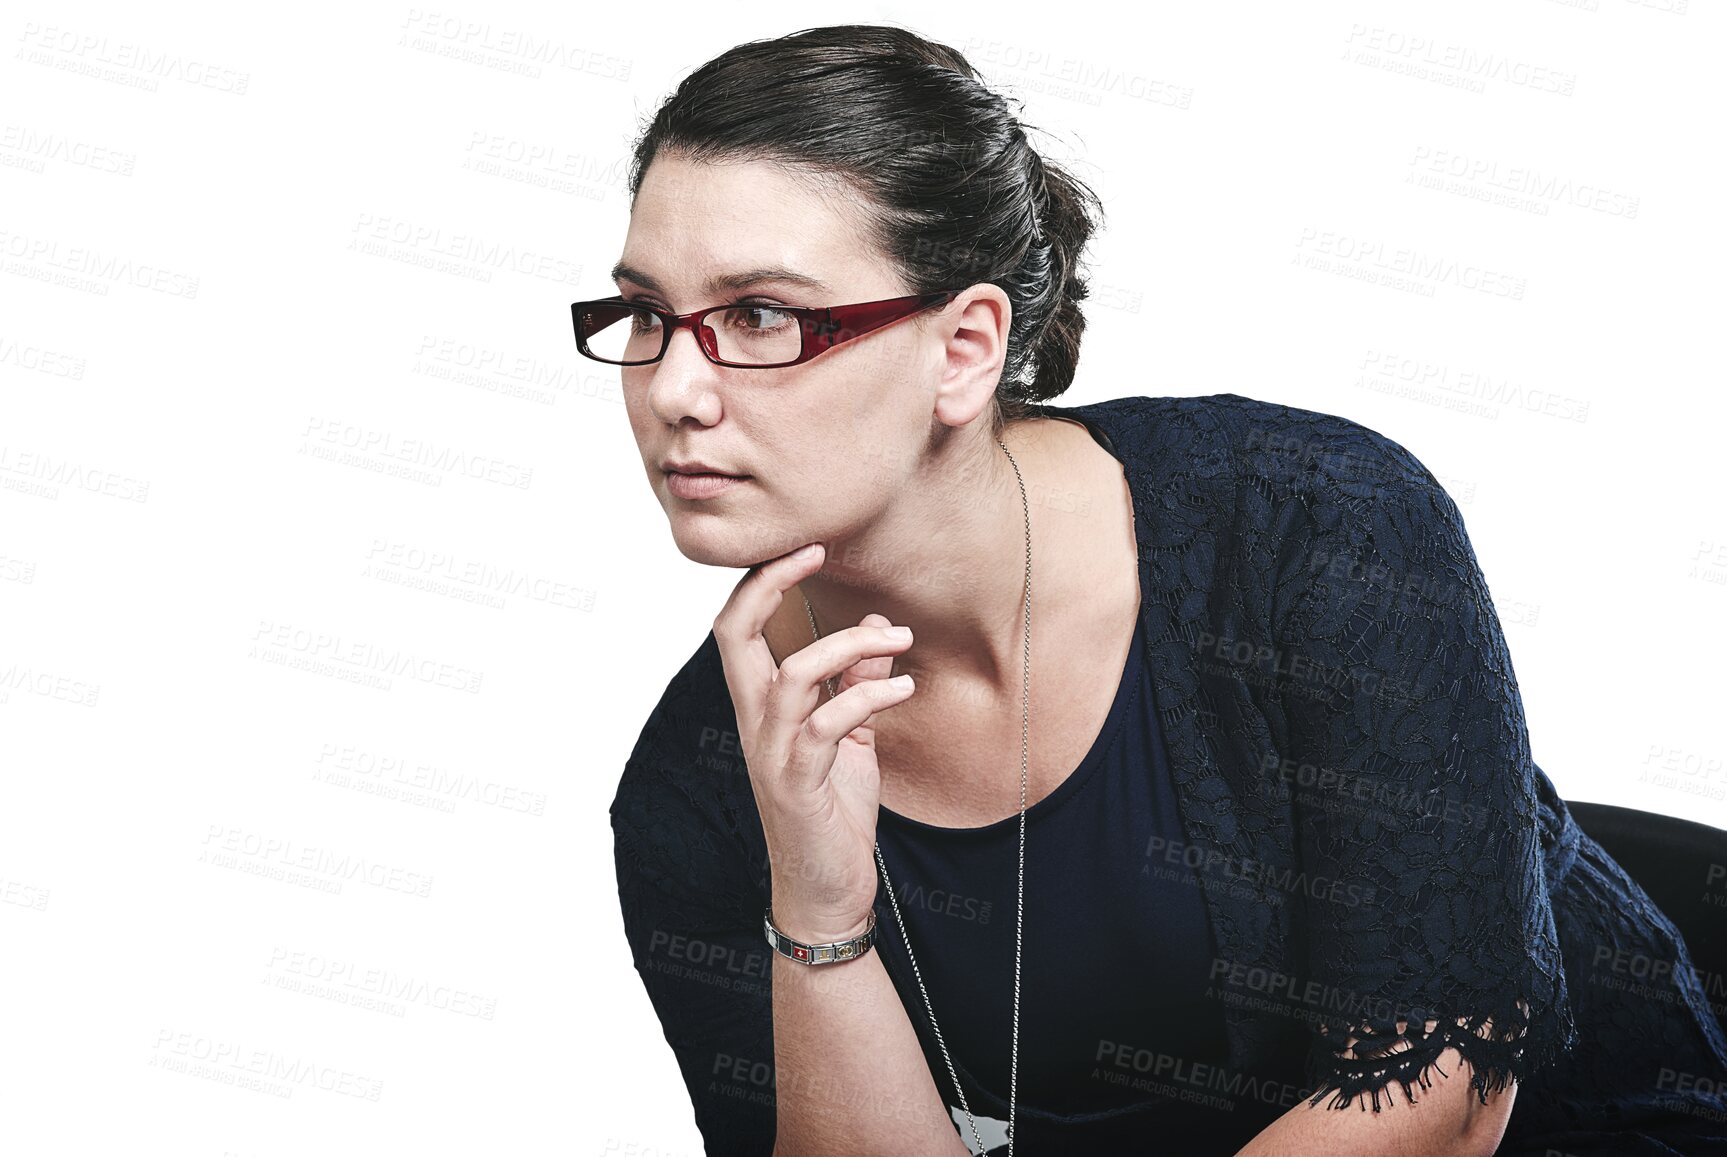 Buy stock photo Face, thinking and serious with woman in glasses isolated on transparent background for vision or eyesight. Eyewear, future or planning with confident young person on PNG in prescription frame lenses